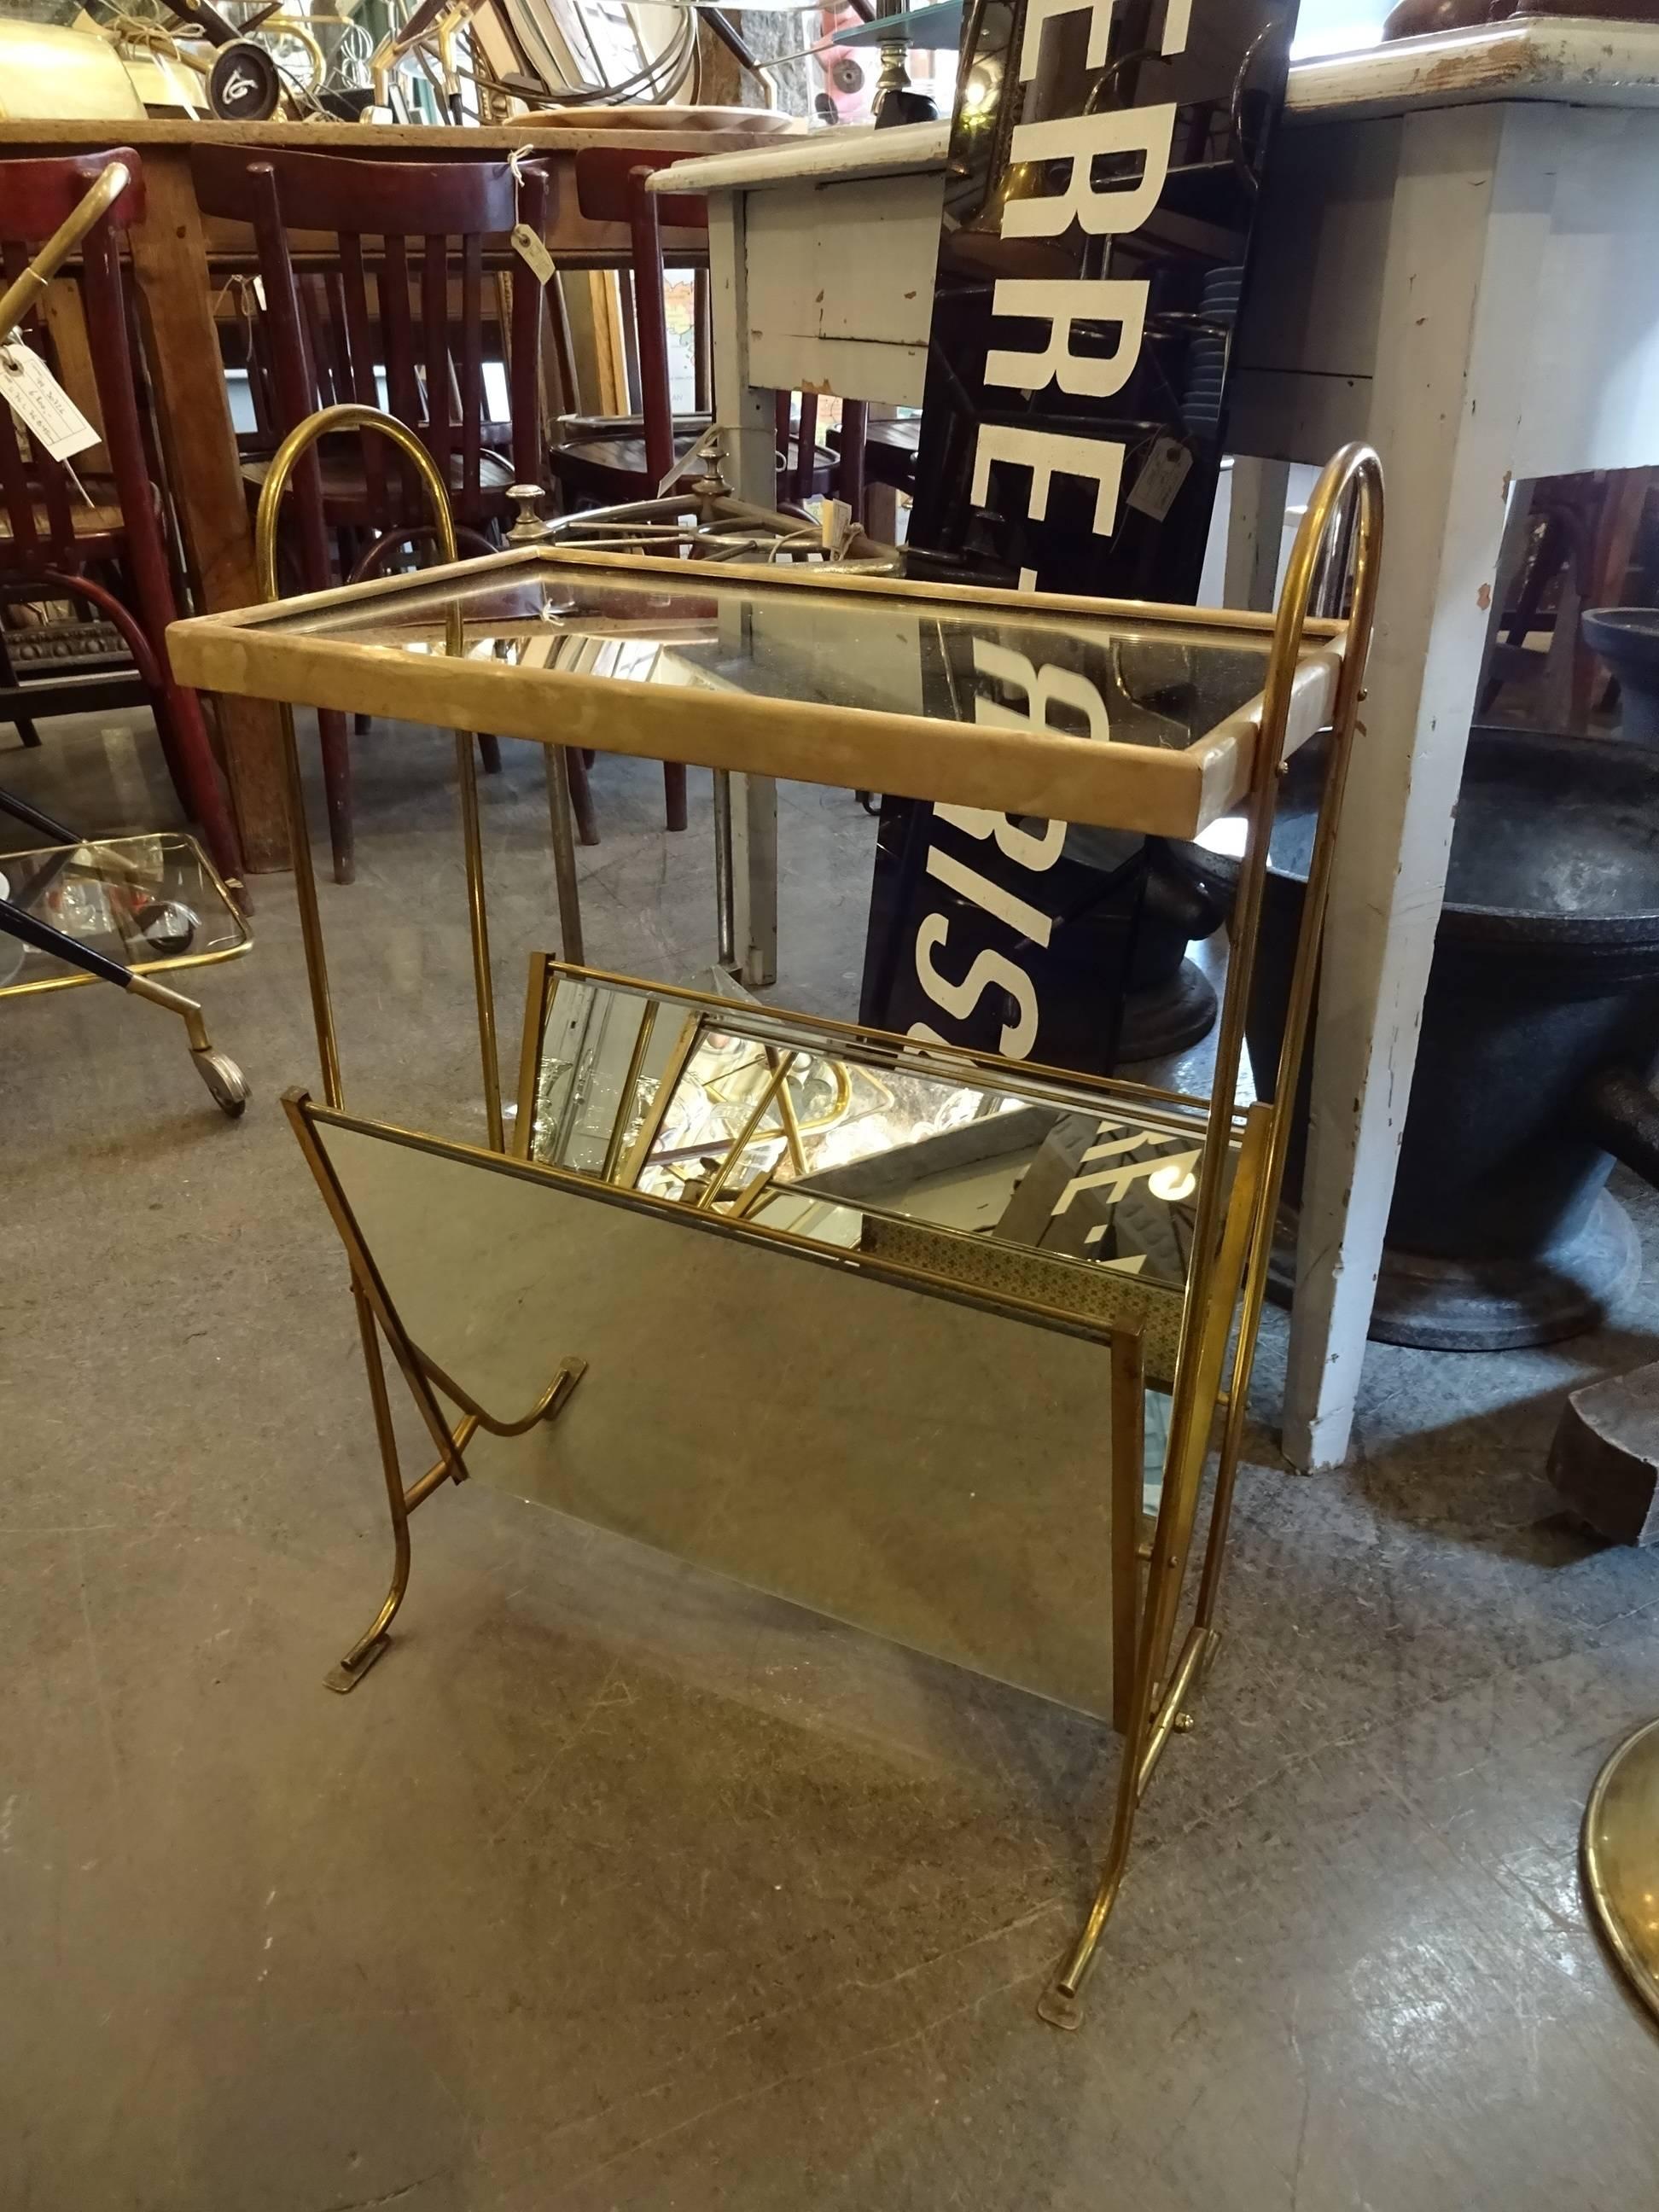 Elegant French newspaper rack / side table in brass with a small mirrored tray and a holder for newspapers or magazines. A practical and eye-catching side table.